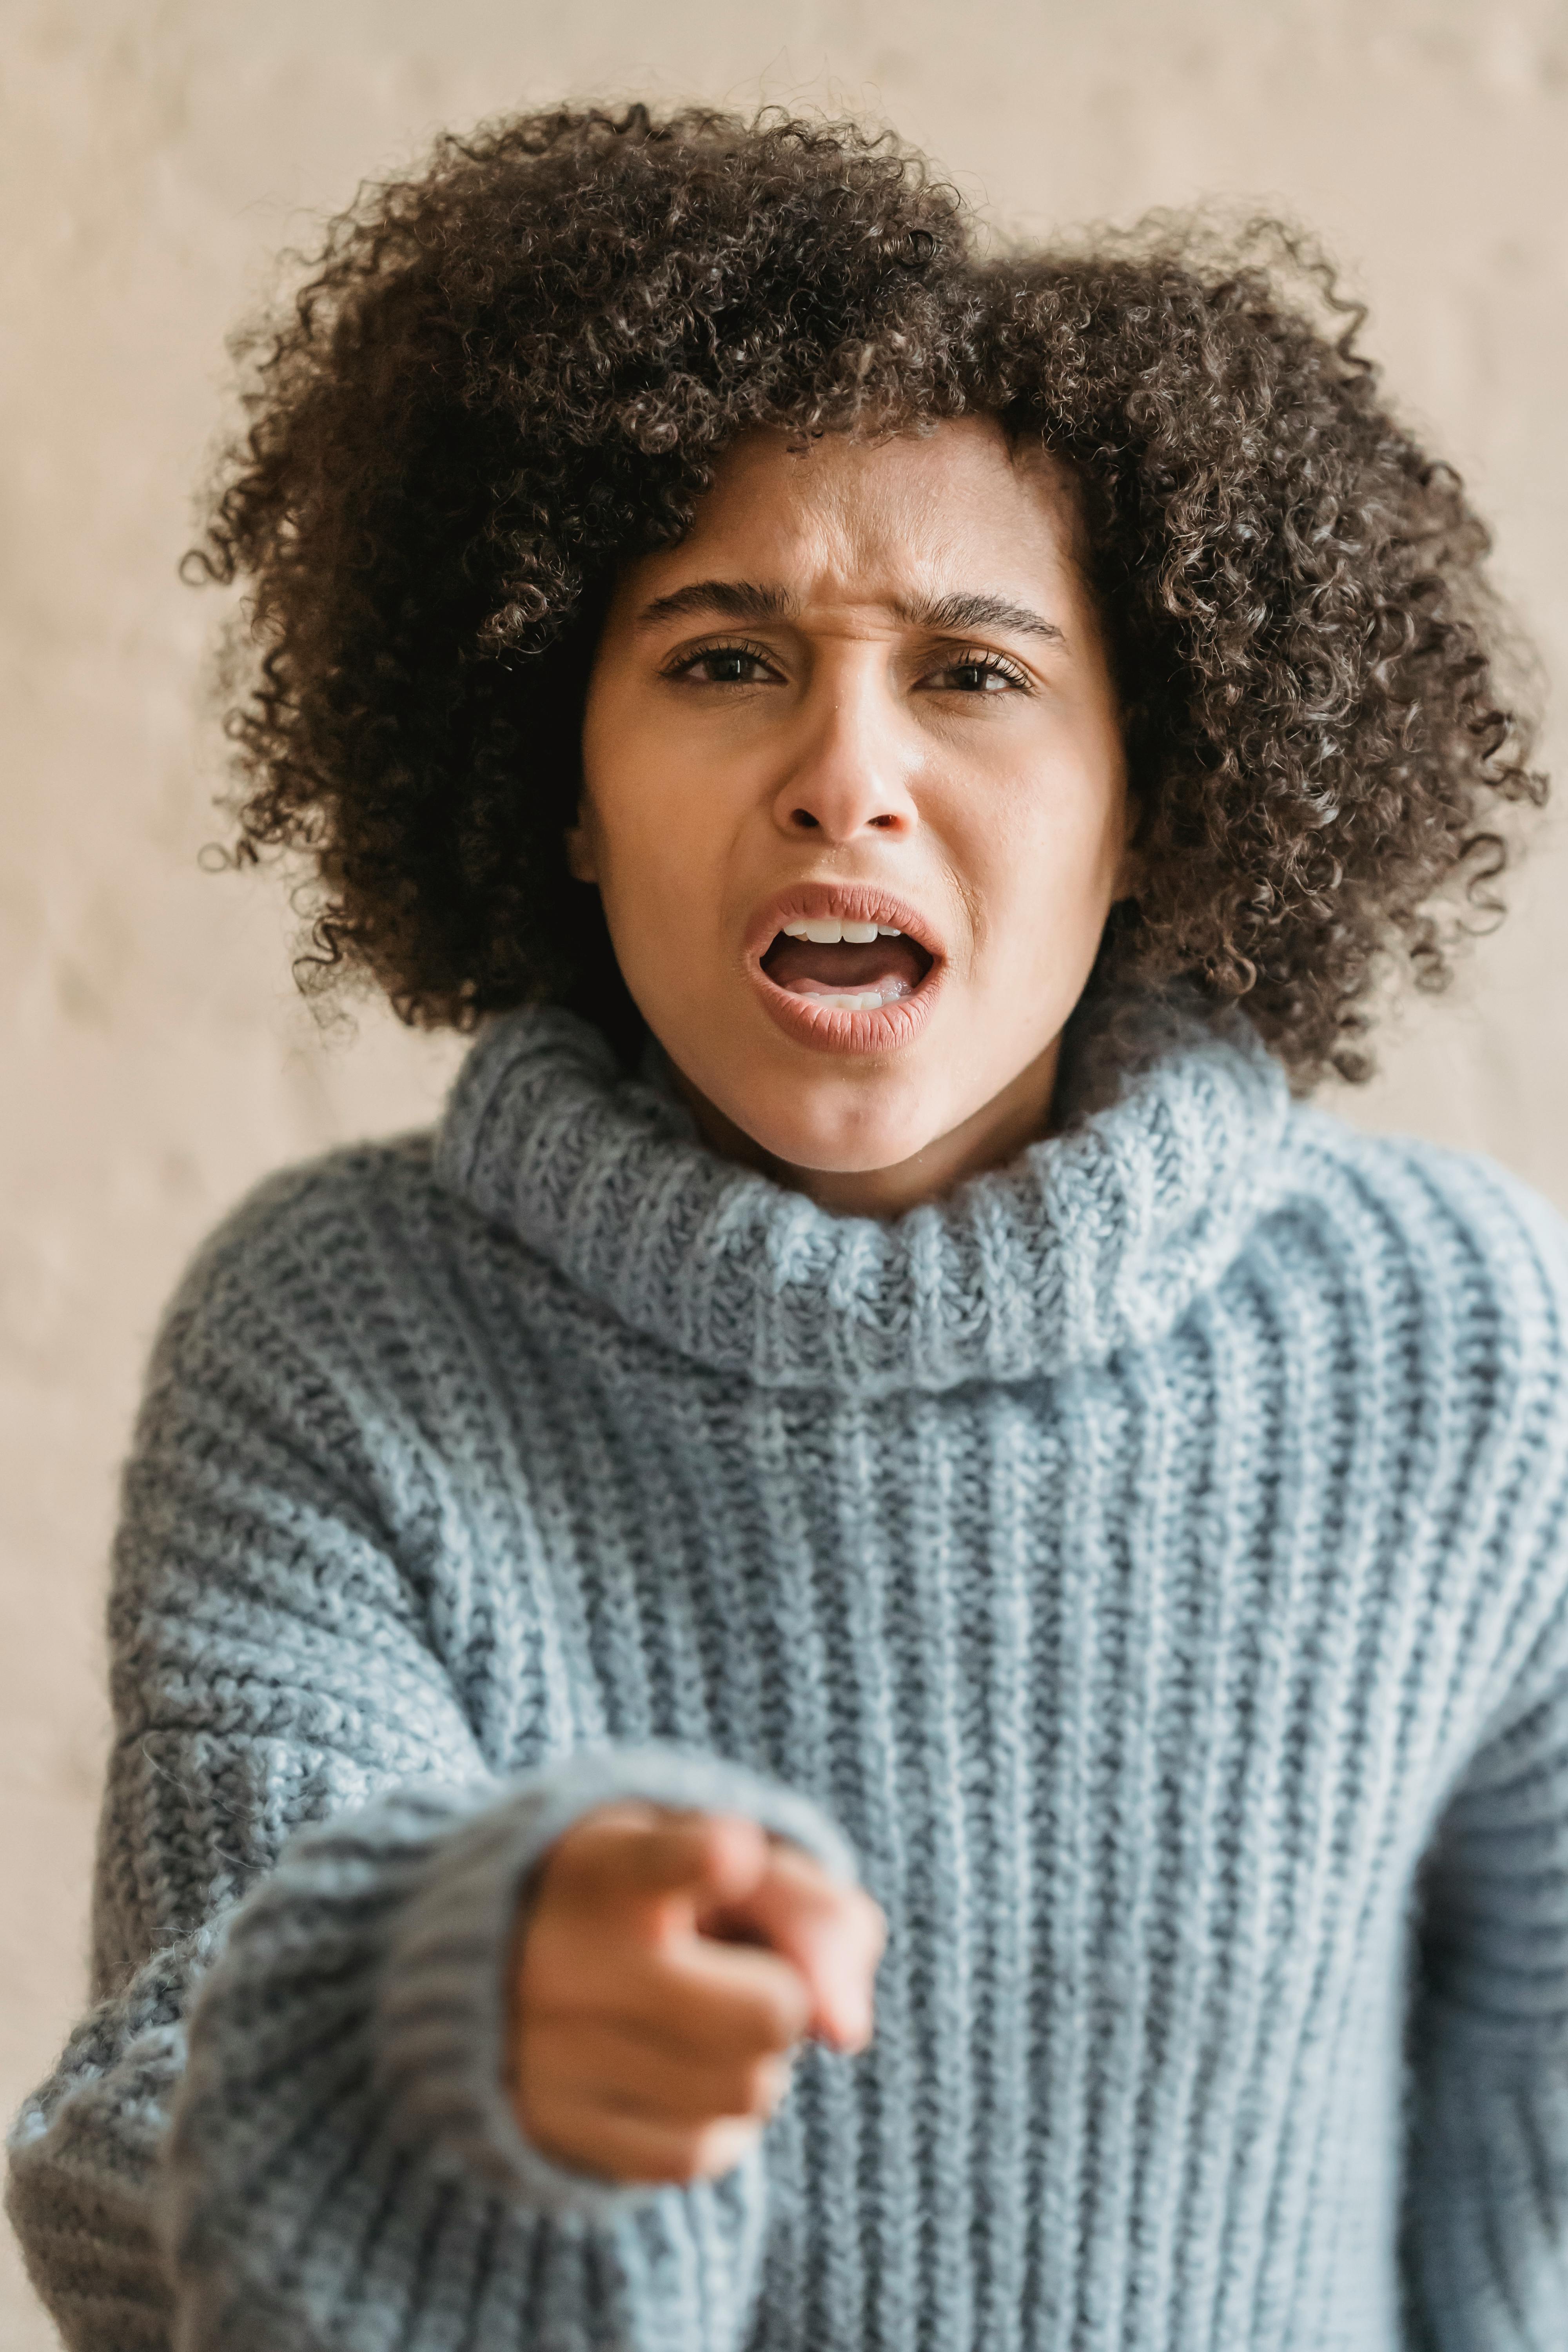 Woman tries to respond to allegations. For illustration purposes only | Source: Pexels